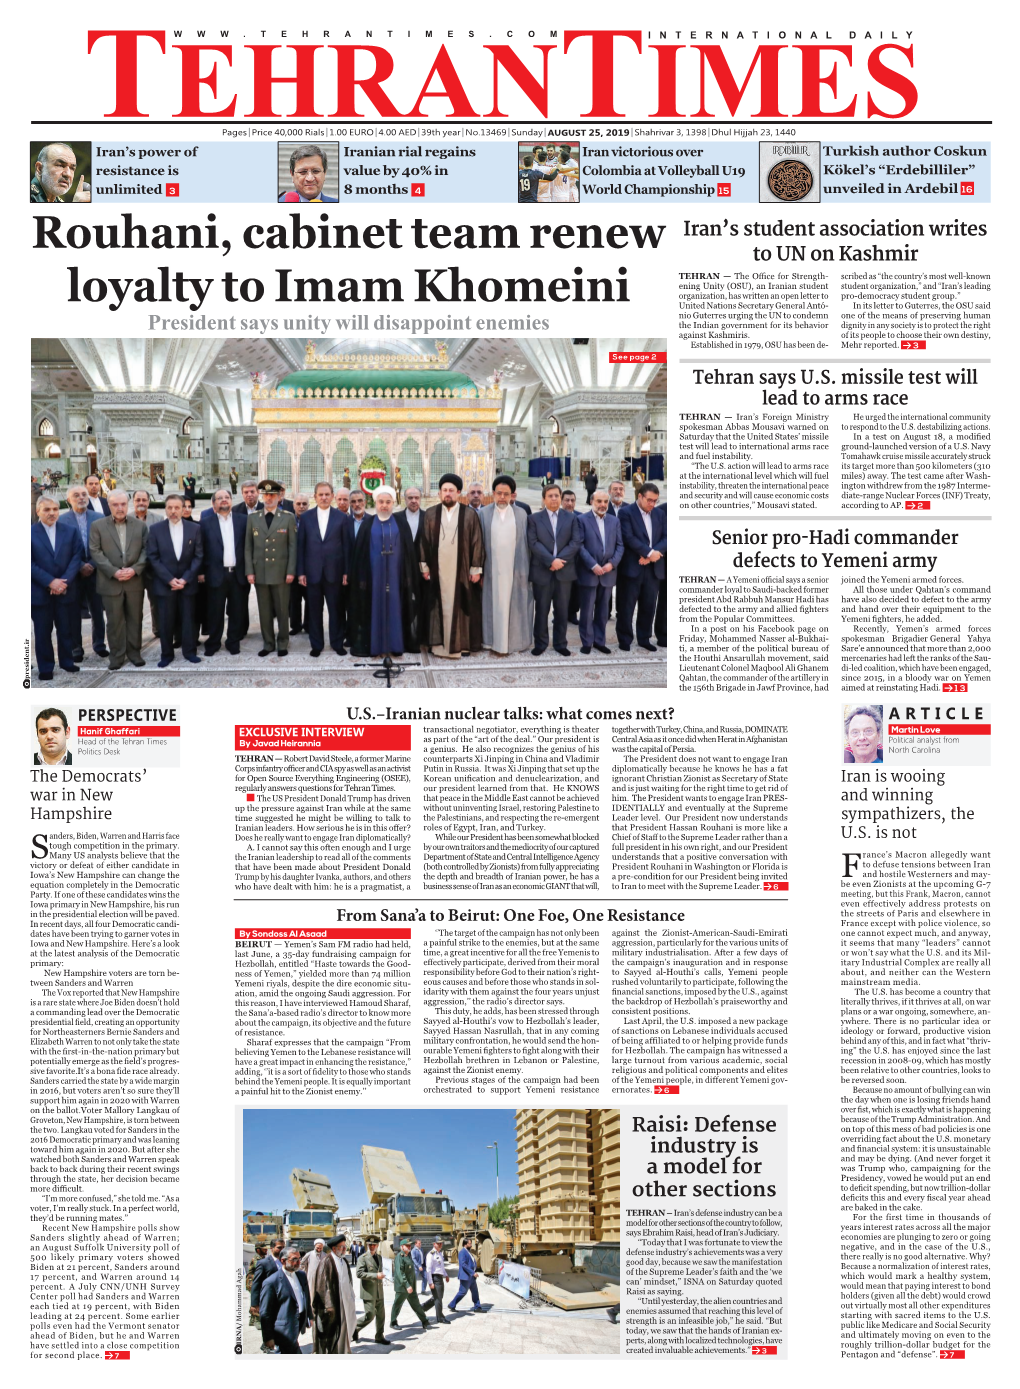 Rouhani, Cabinet Team Renew Loyalty to Imam Khomeini to Diversify and Strengthen Its Foreign Relations